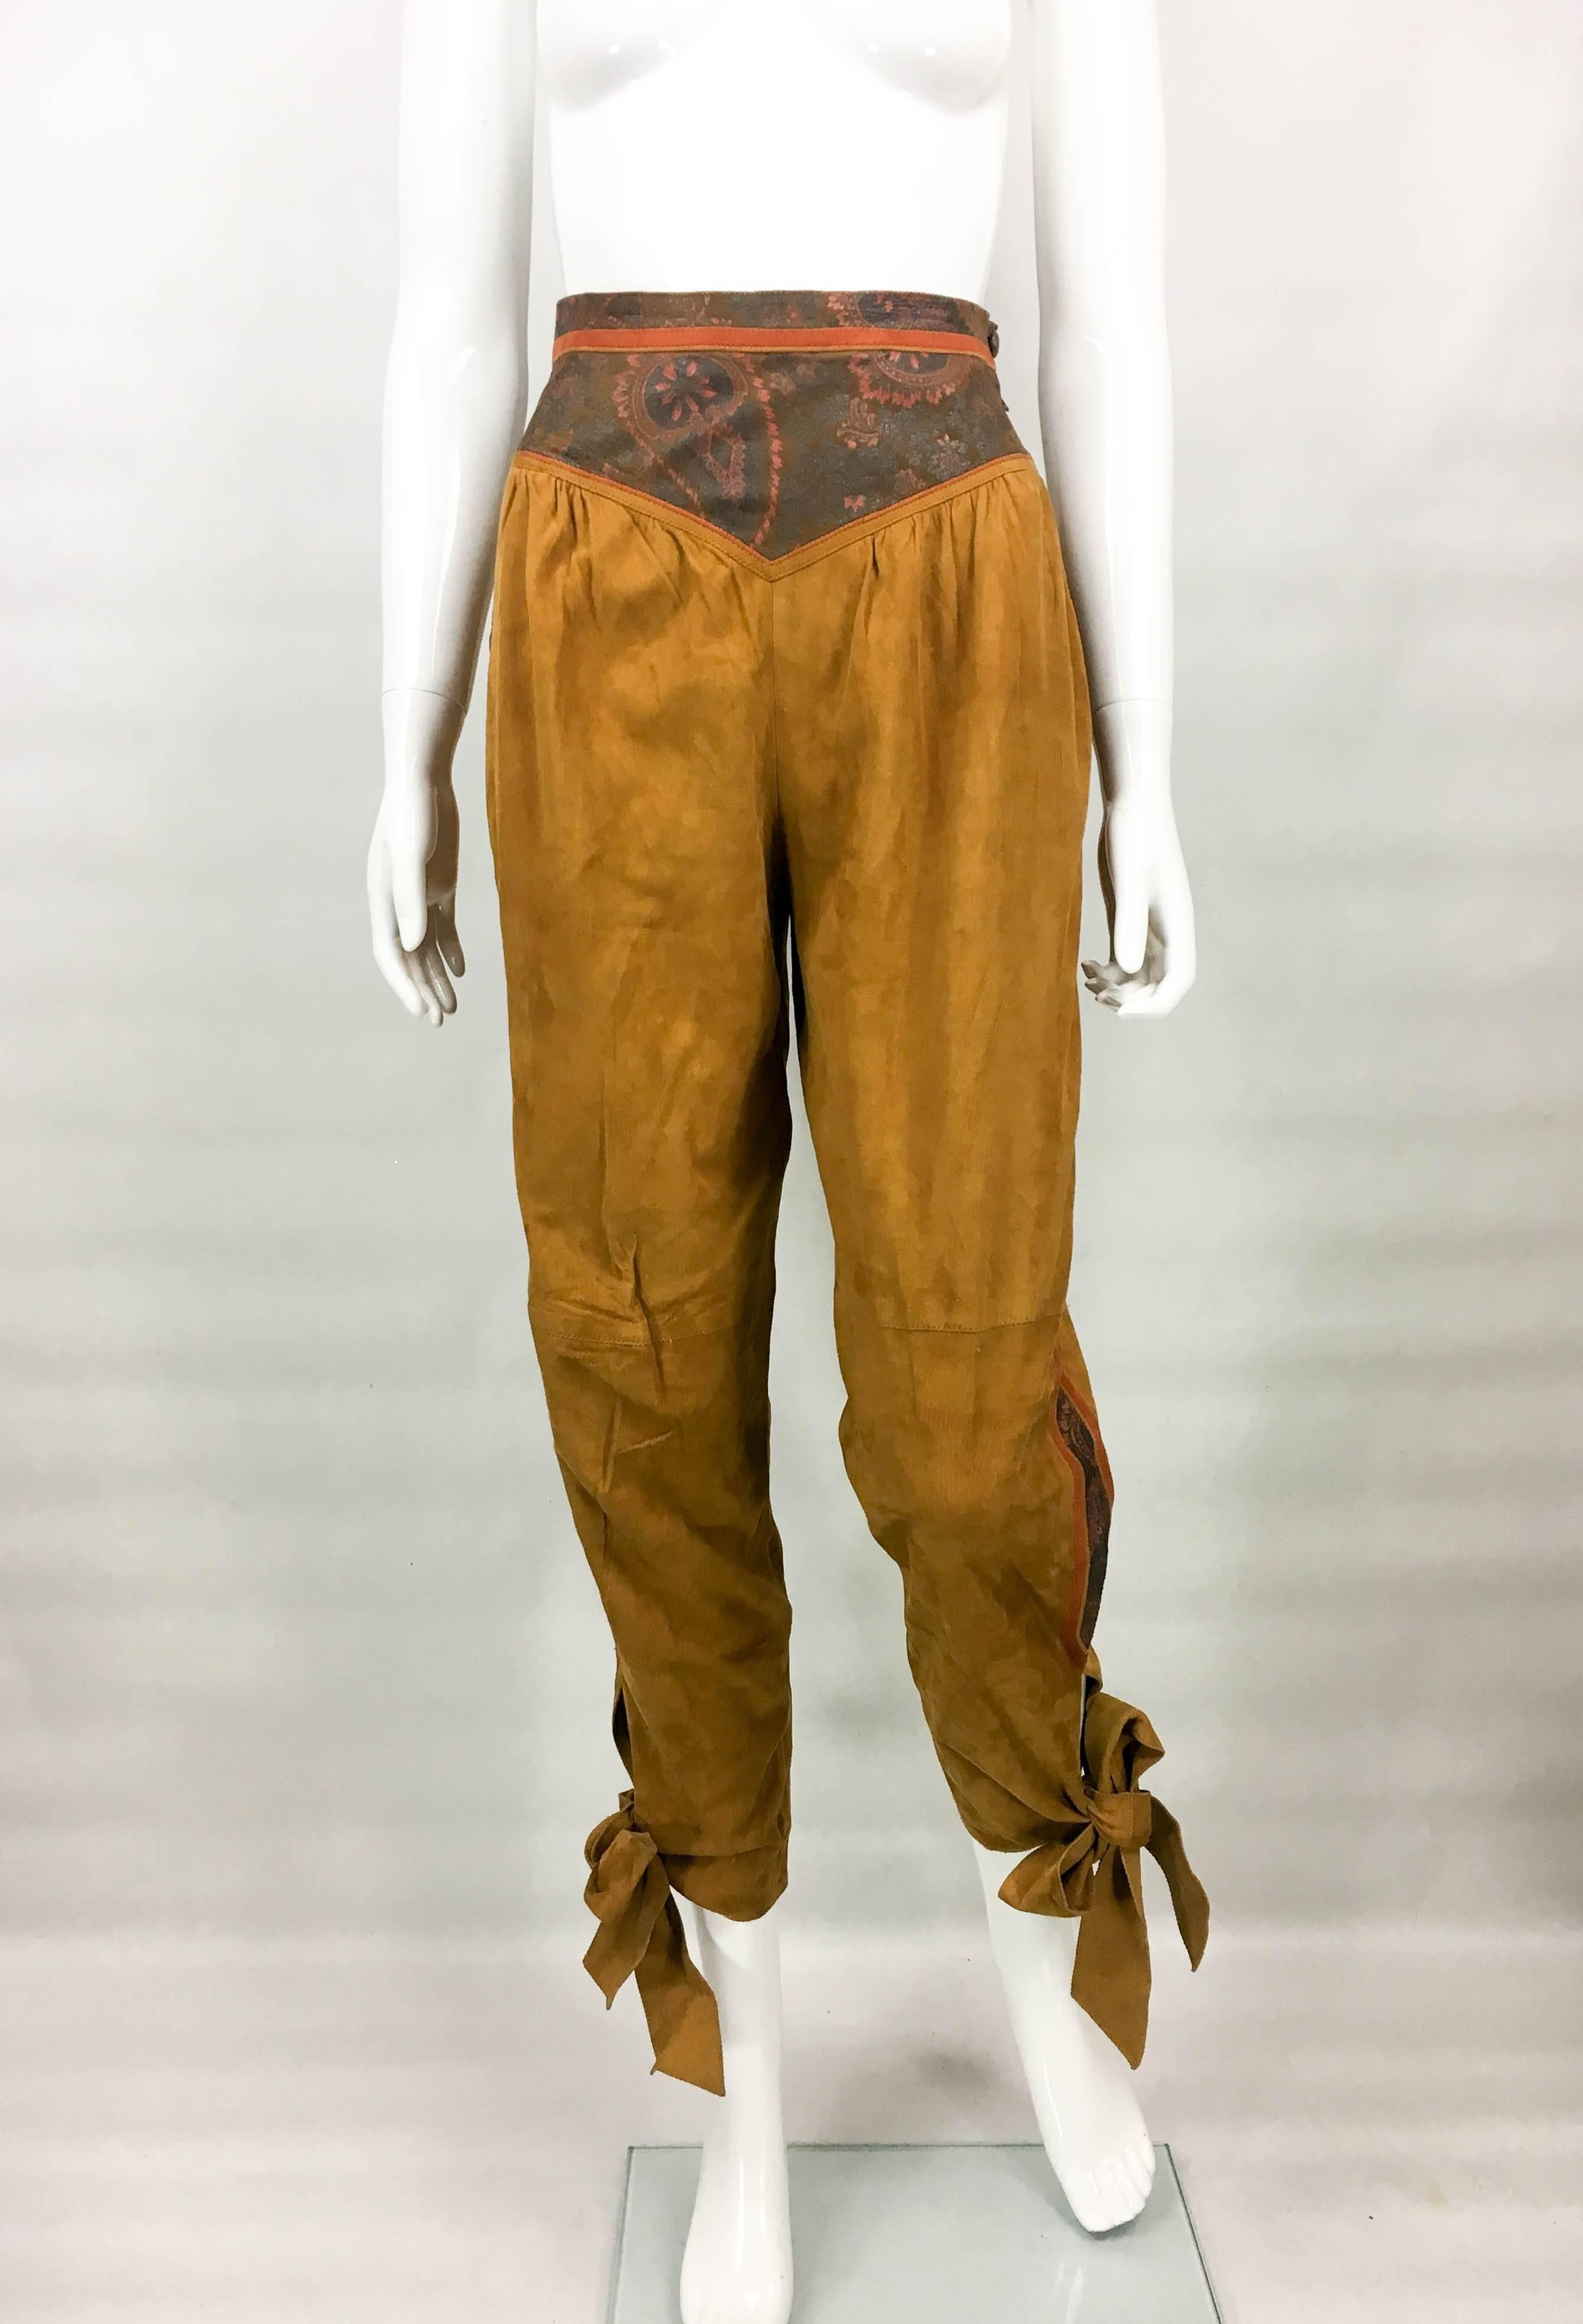 Vintage Roberto Cavalli Brown Suede Cropped Trousers. These very stylish trousers by Roberto Cavalli date back from the 1980’s. High-waisted, they are made in camel suede and feature painted leather panels on the waist and down the sides. A striking